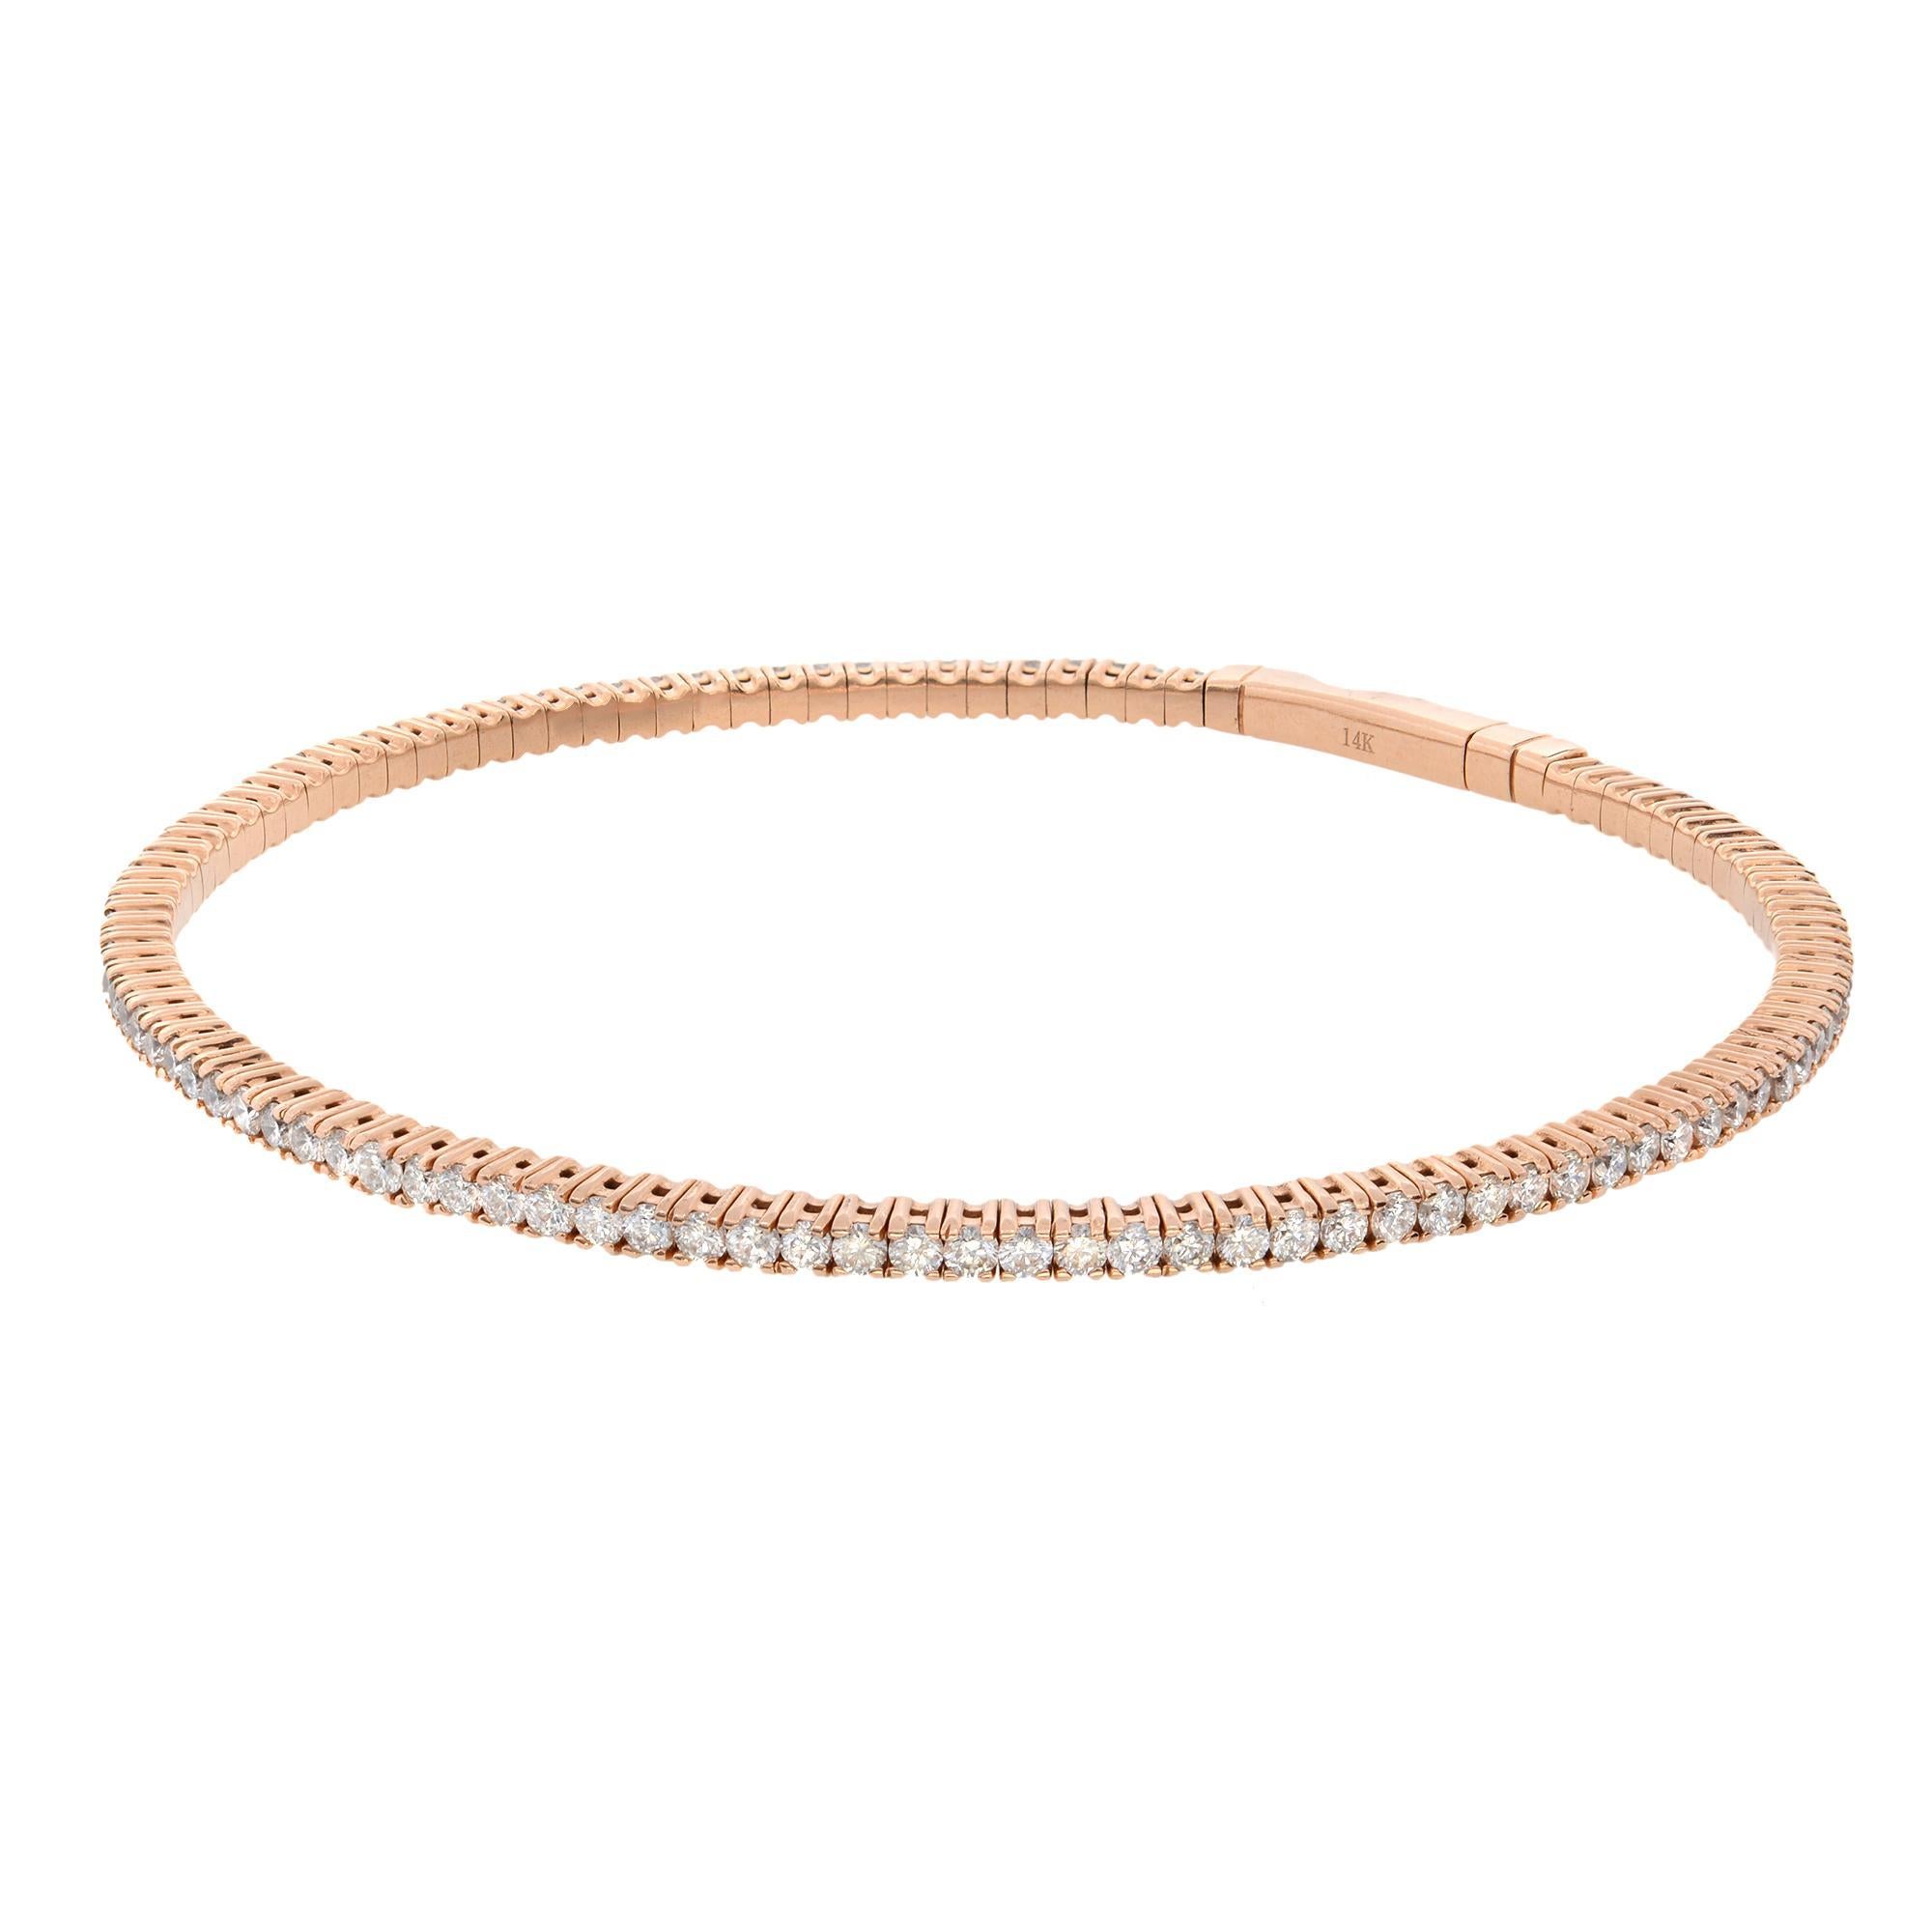 A classic look with easy elegance, this diamond bangle exudes sophistication. One stunning flexible bangle bracelet in 14K rose gold, prong-set with fine white diamonds with a total weight of 1.50cts. The bangle length is  6.75 inches measures and